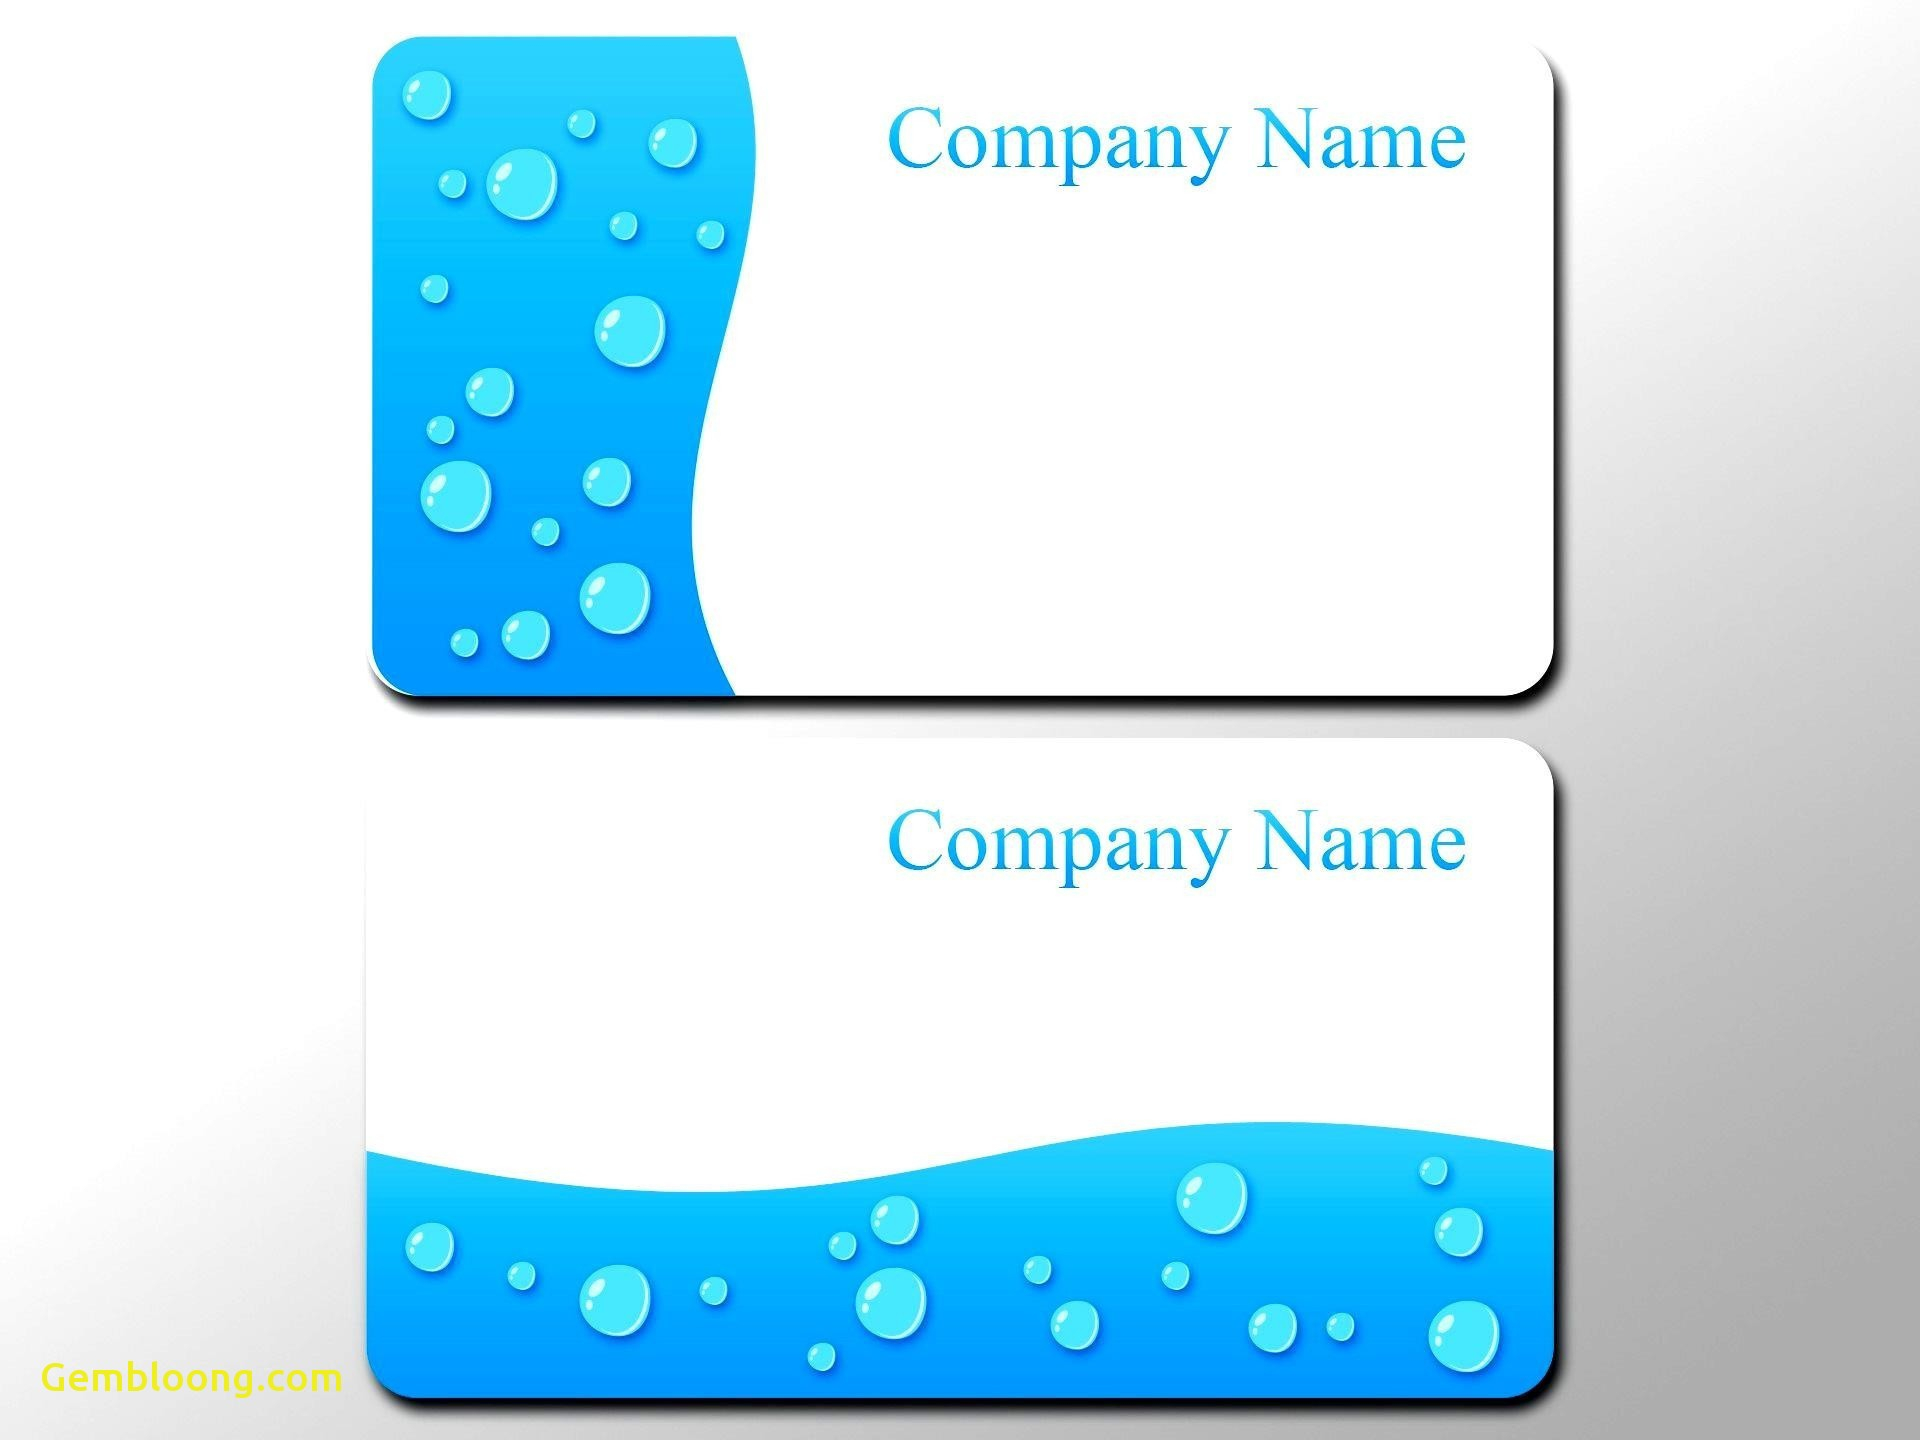 Business Card Photoshop Template Psd Awesome 016 Business Inside Plain Business Card Template